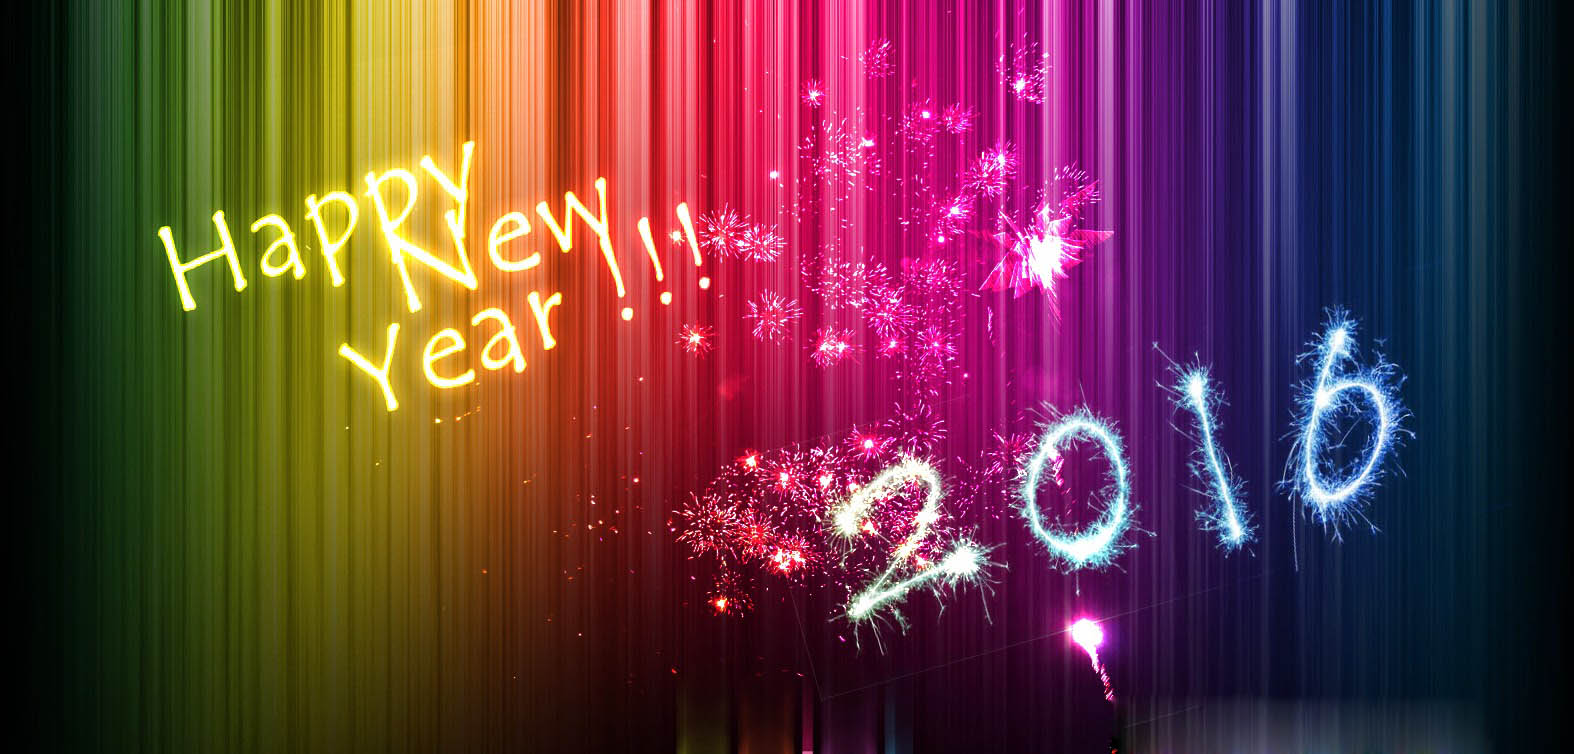 Happy New Year 2016 Wallpapers Images Pics and Pictures